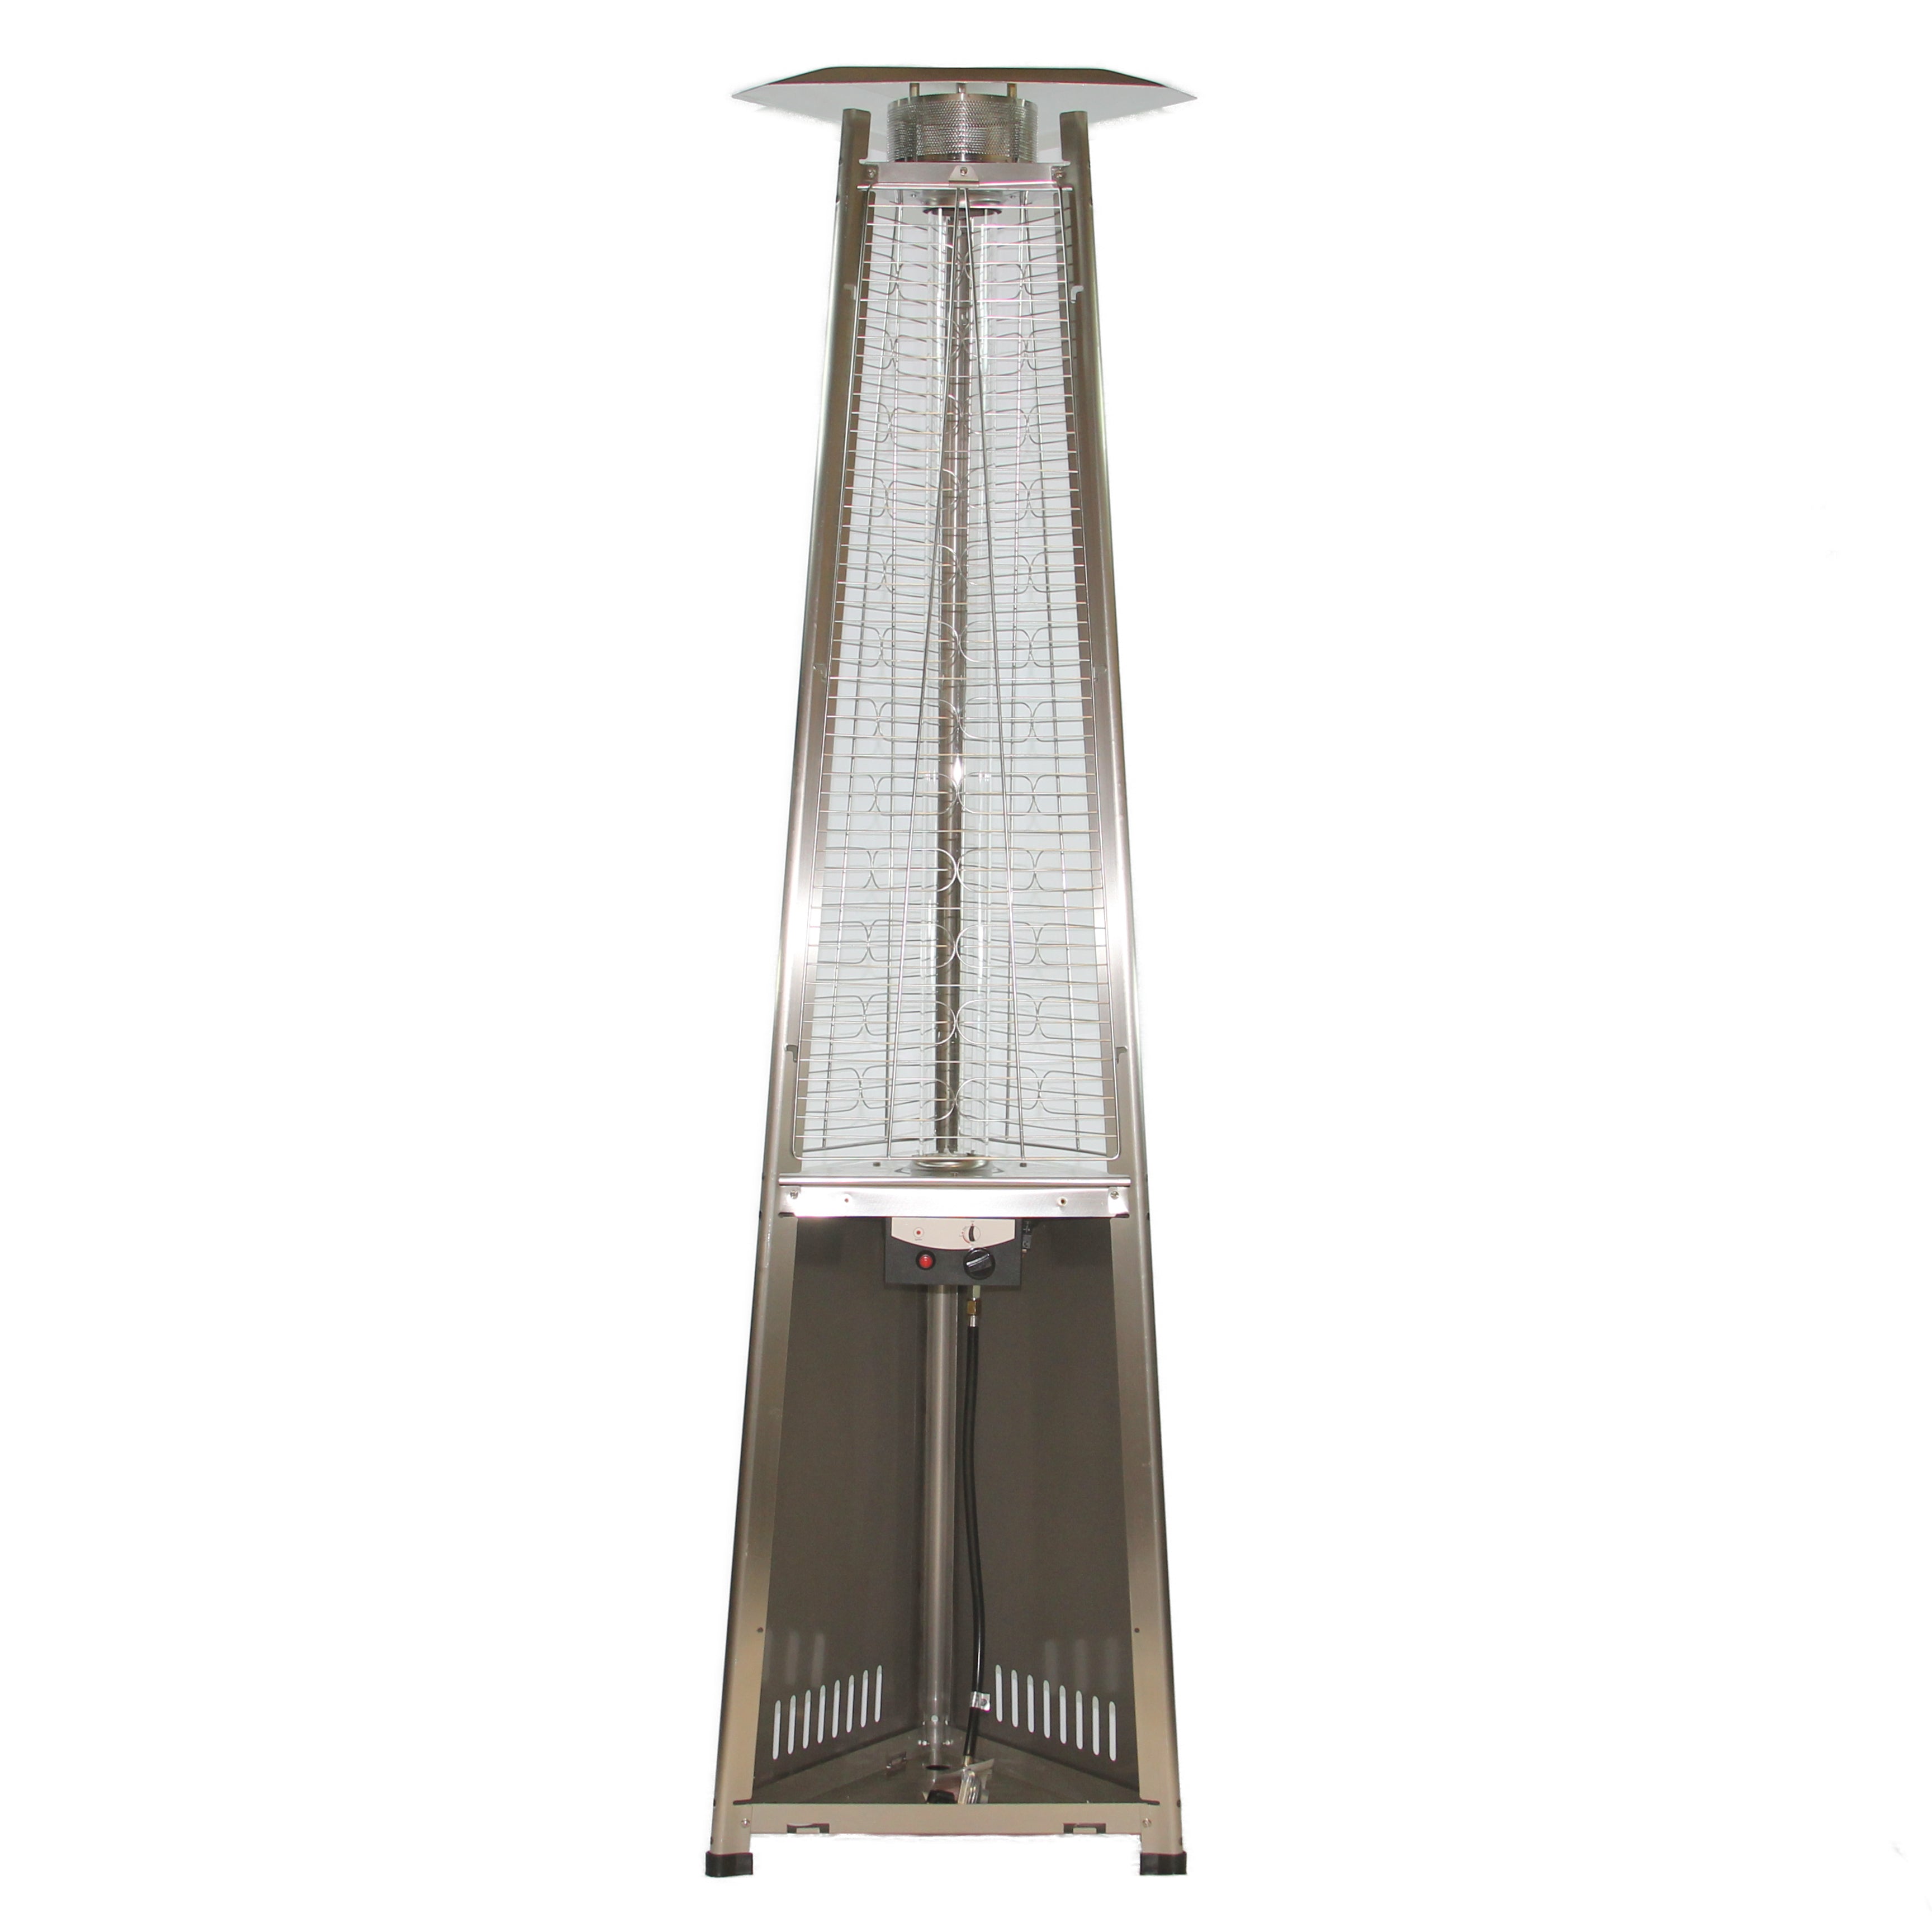 RADtec 93 Pyramid Flame Natural Gas Patio Heater - Stainless Steel Finish 41,000 BTU - 93-NTR-GAS-PYR - Back View